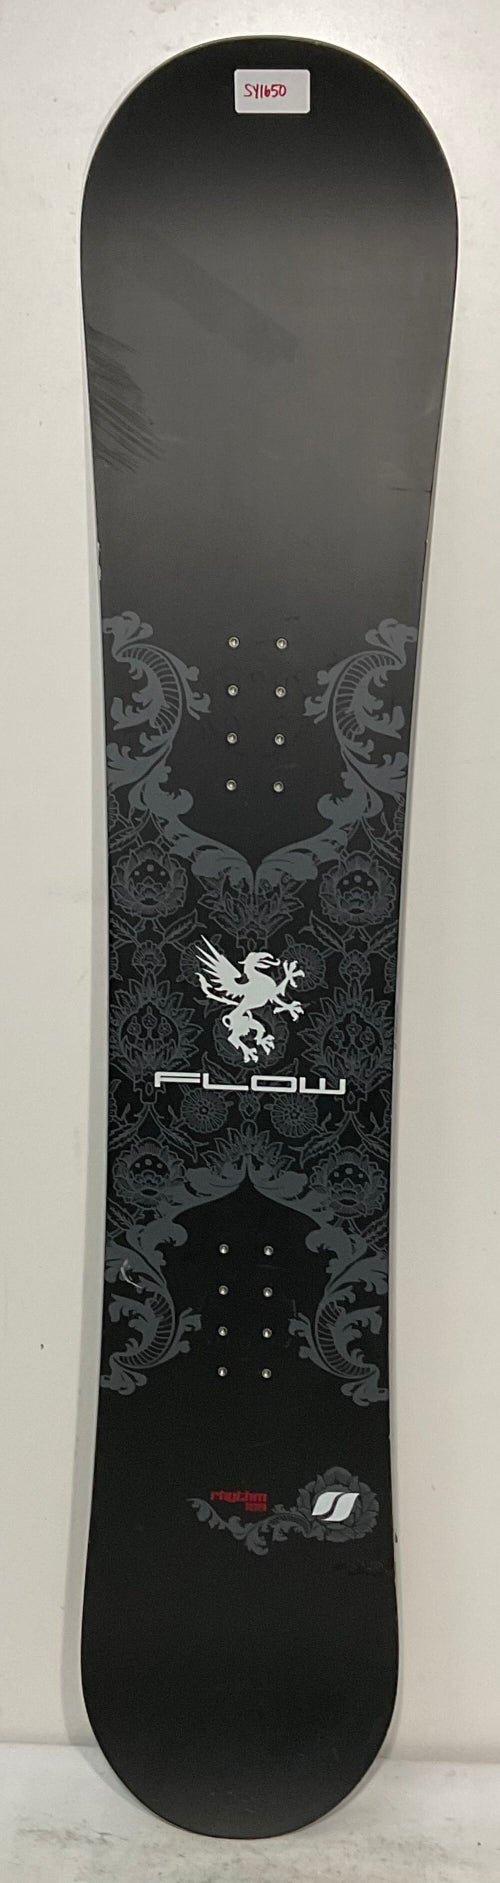 Men's Used Flow Rhythm 159cm Snowboard Without Bindings (SY1650)